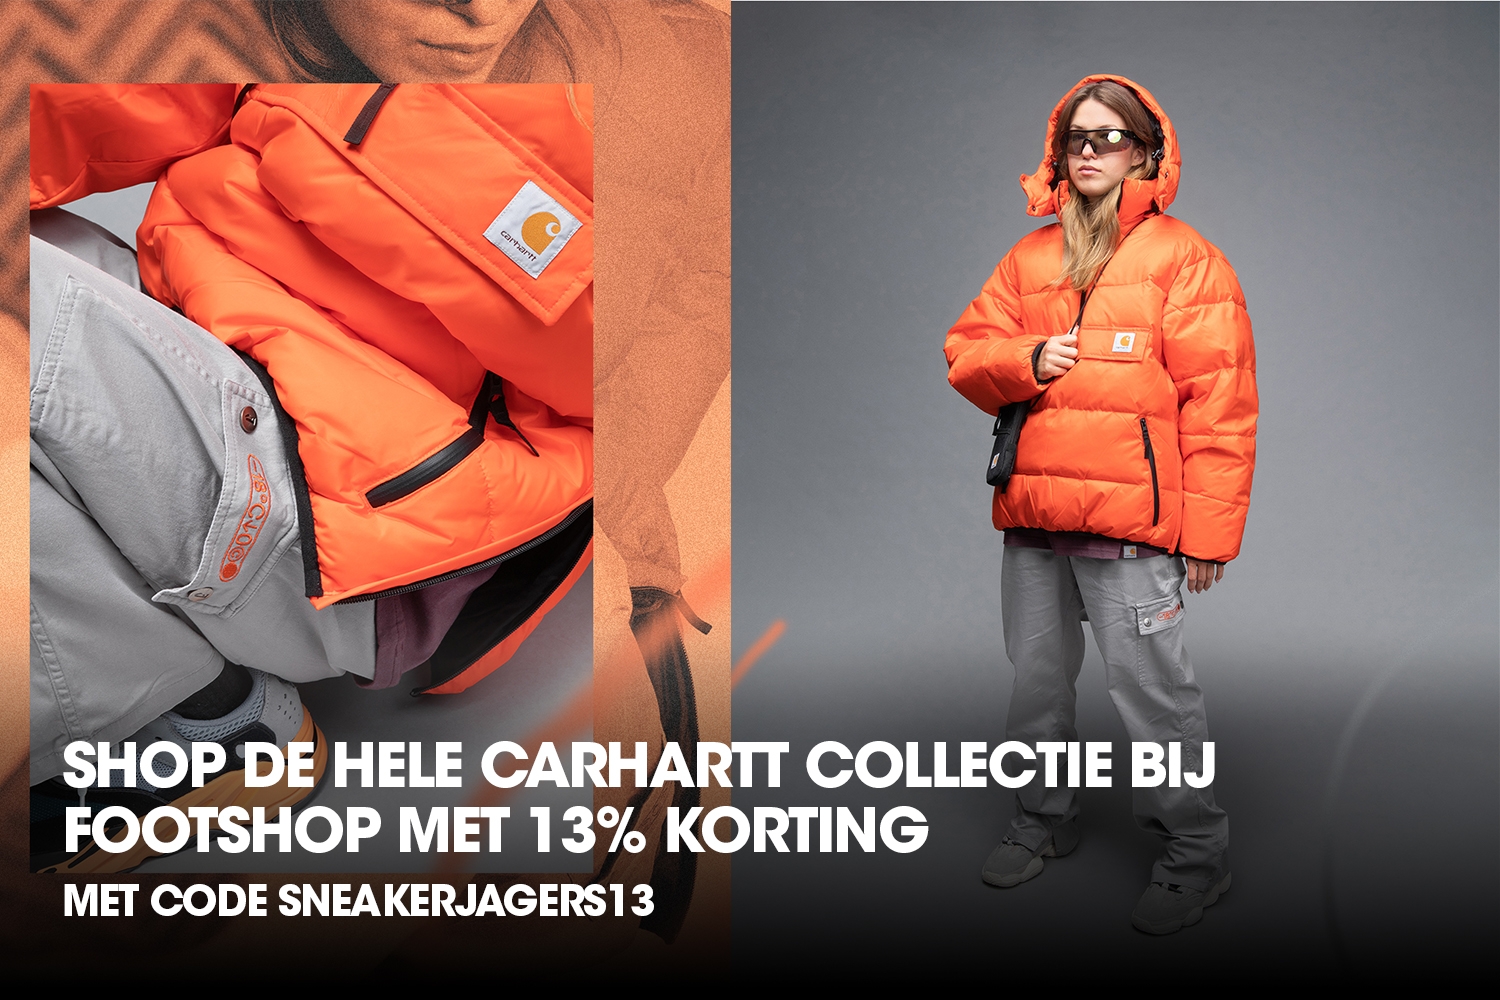 The Carhartt Wip collection at Footshop with discount